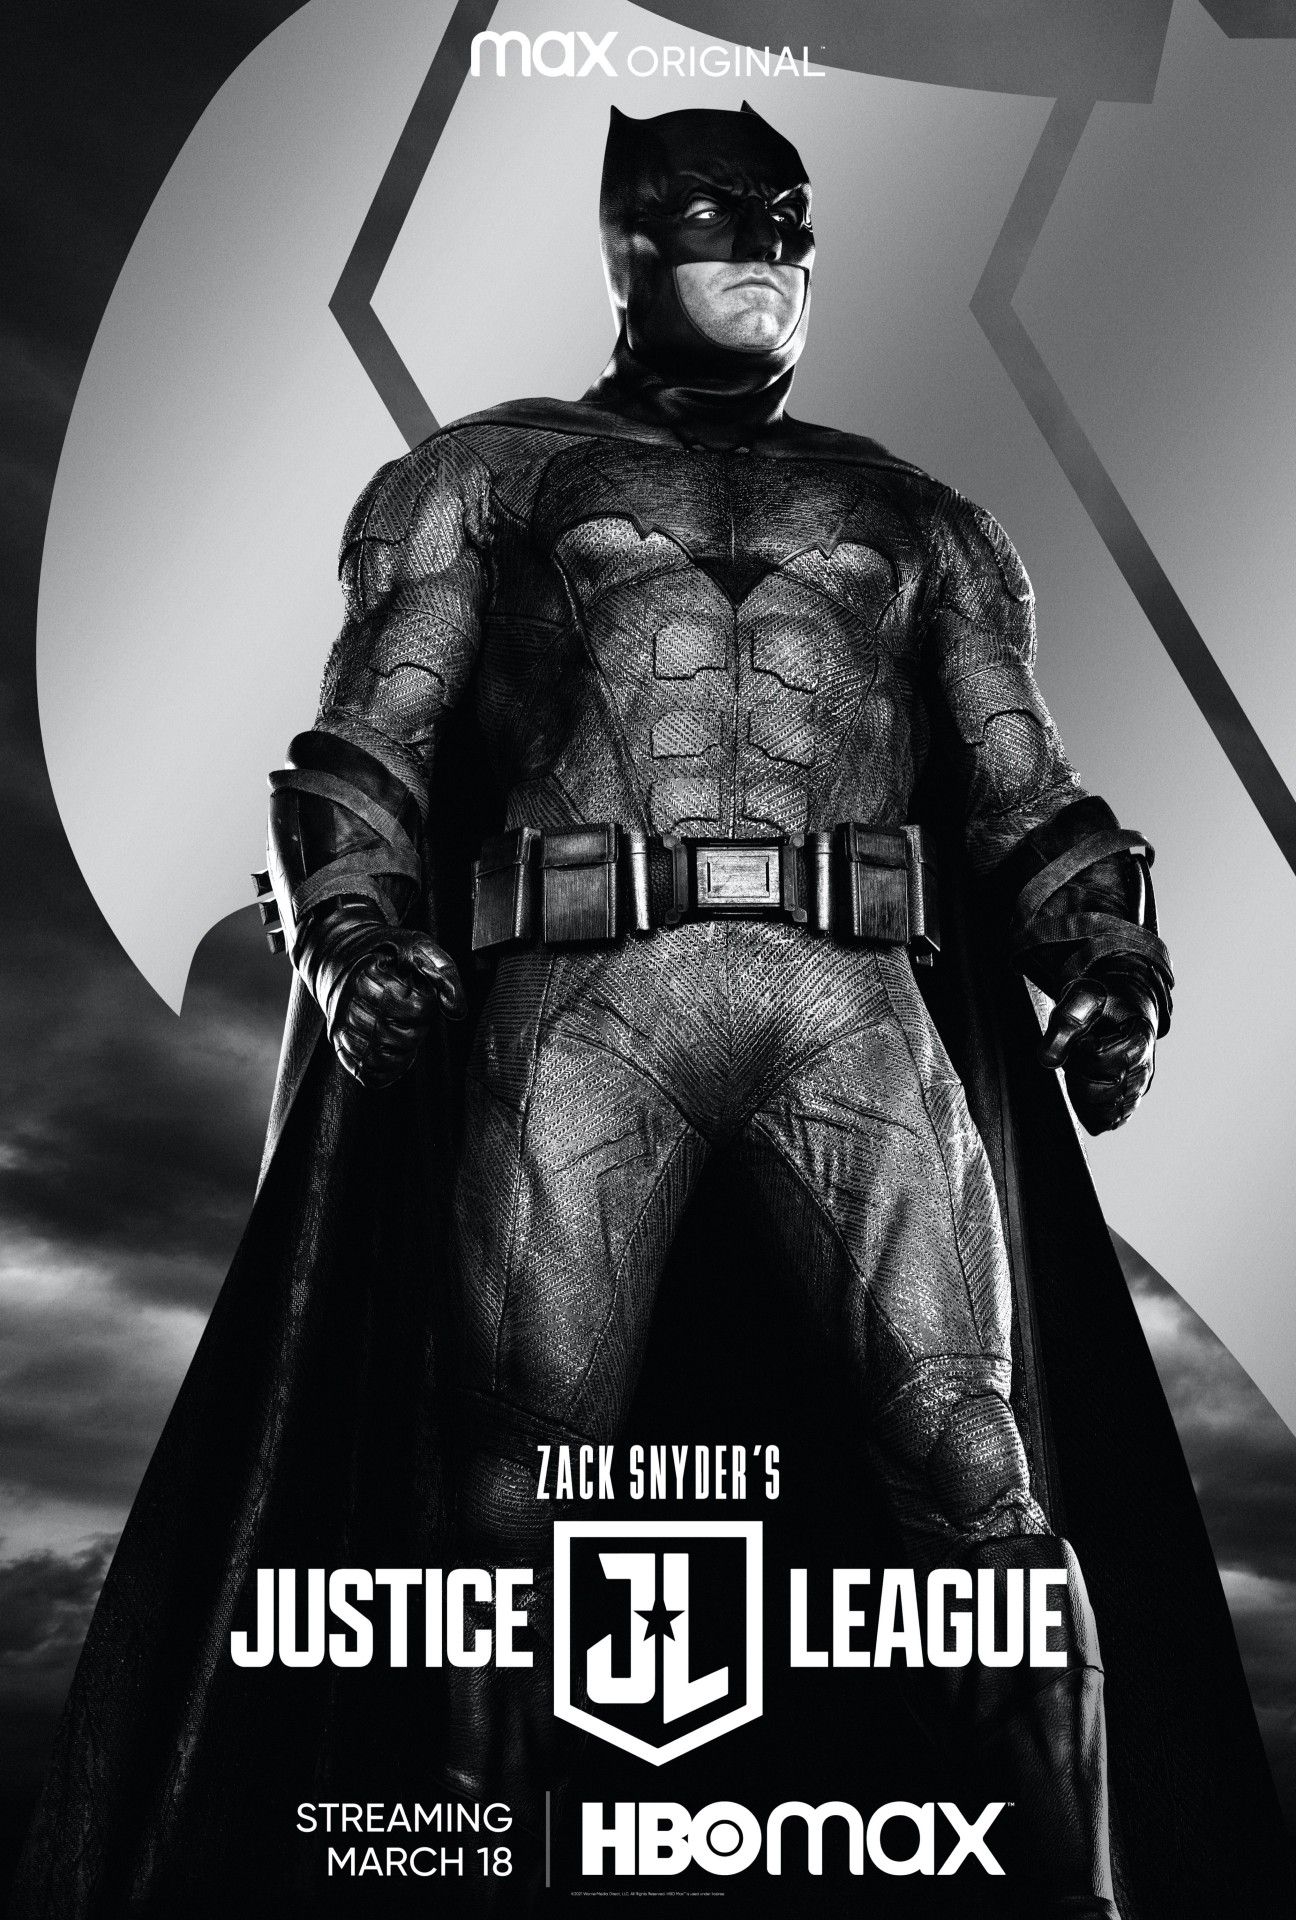 Batman character poster Zack Snyder's Justice League